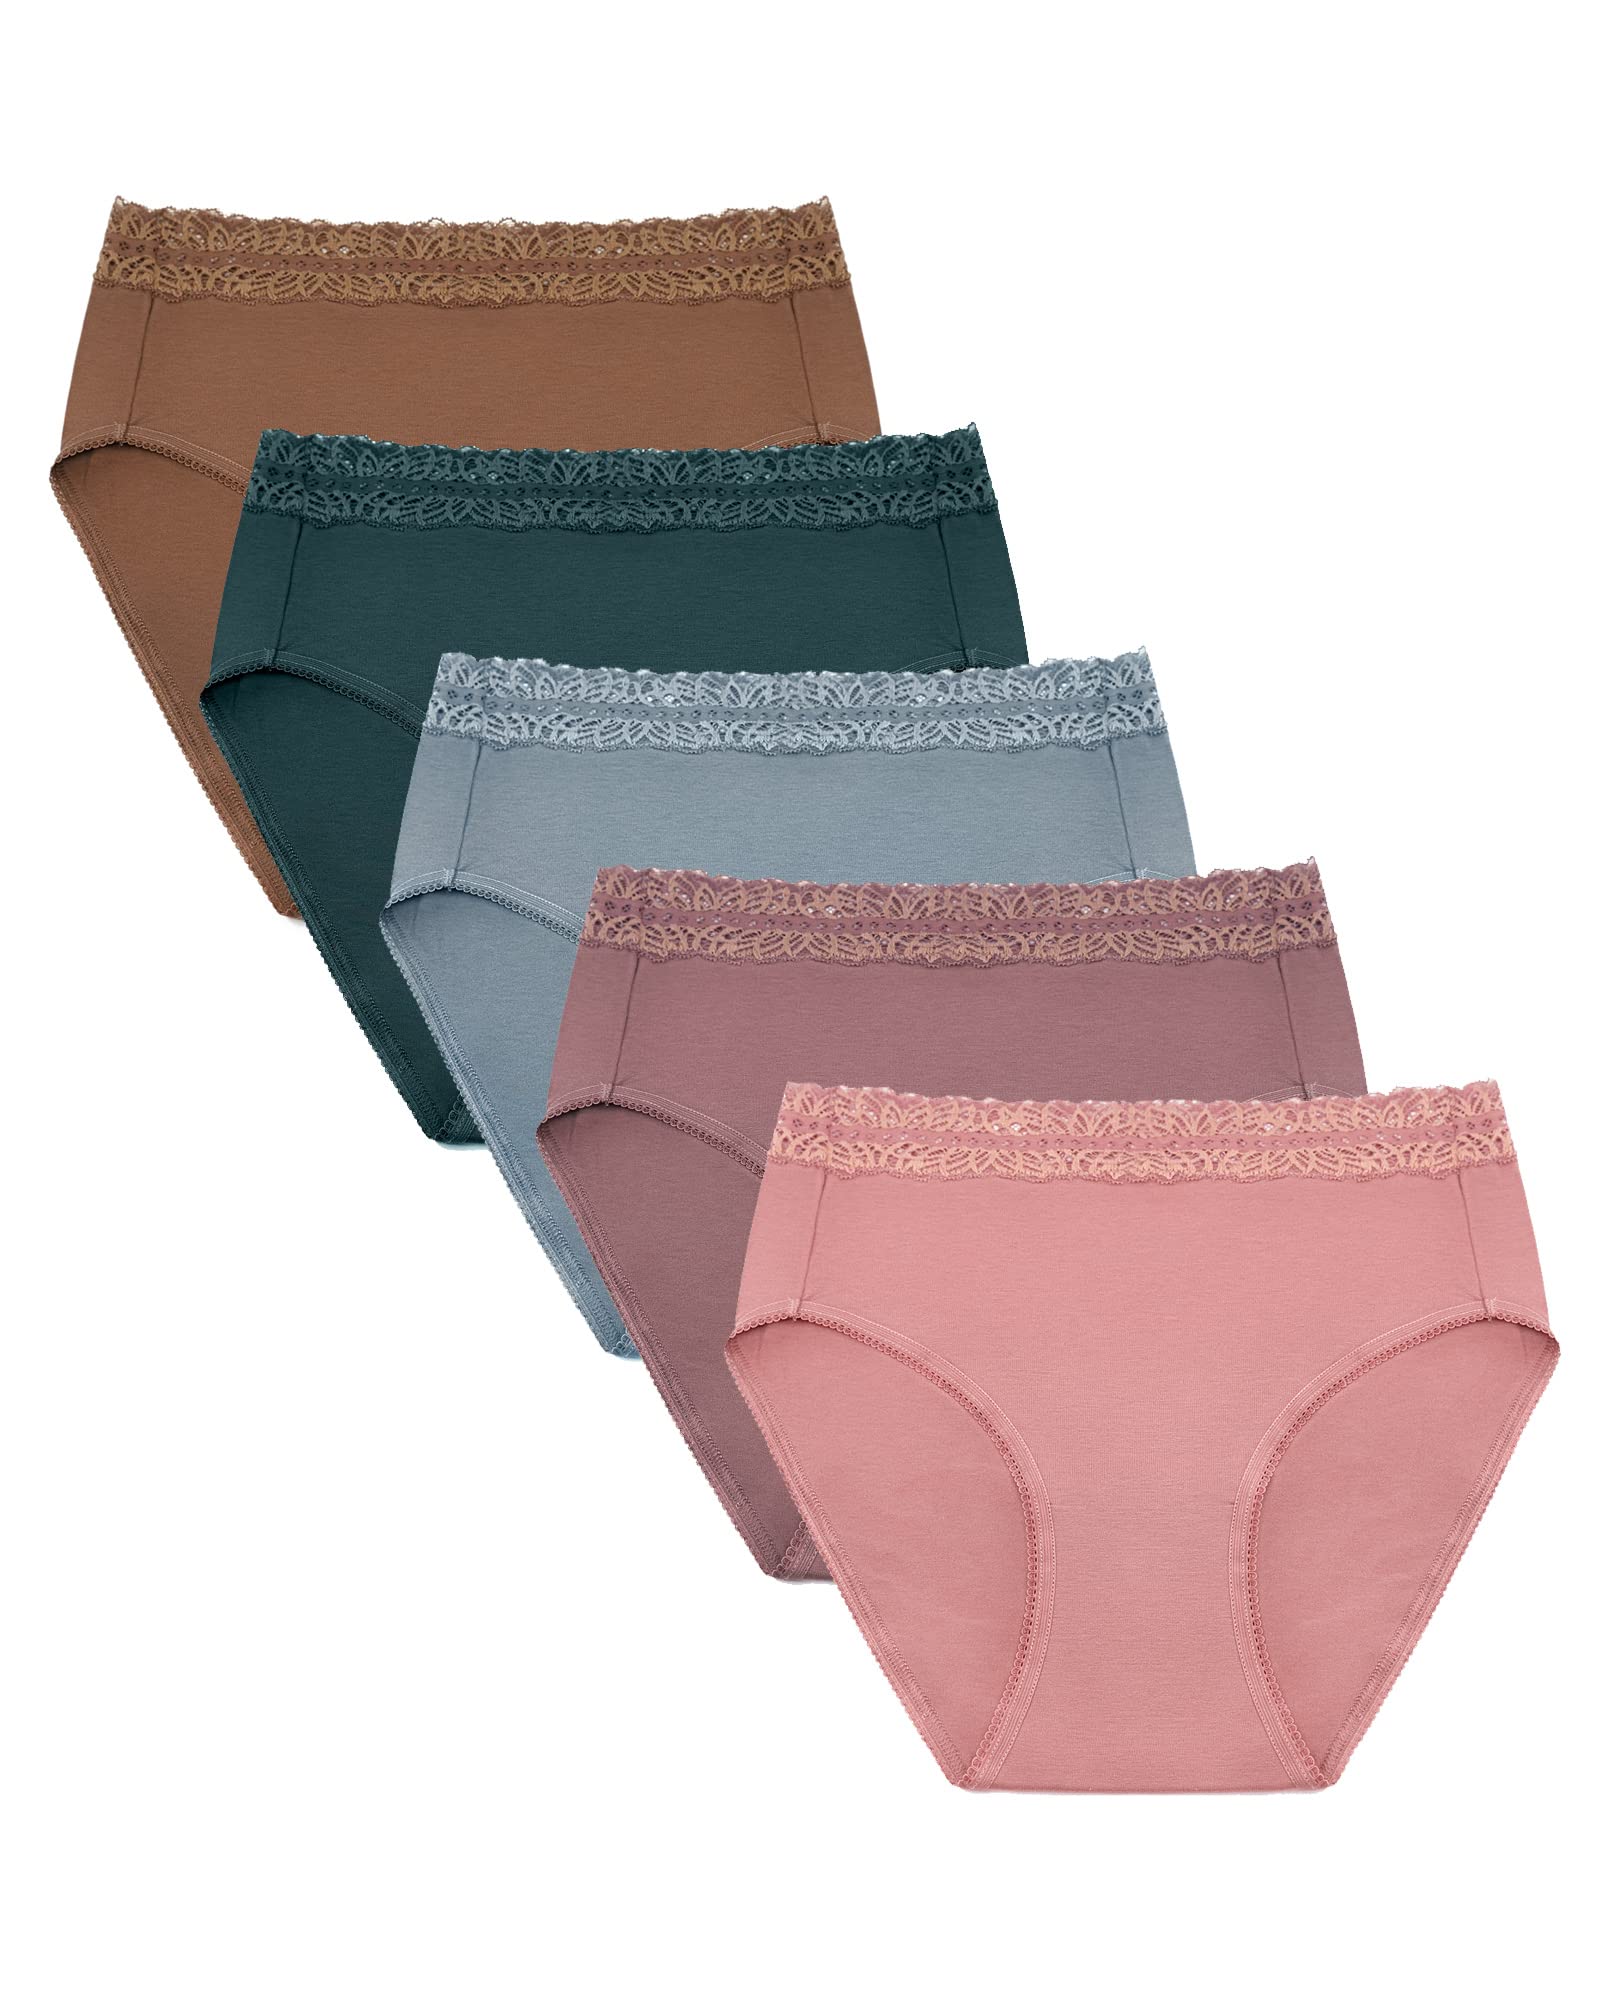 Kindred Bravely High Waist Postpartum Underwear & C-Section Recovery Maternity Panties 5 Pack